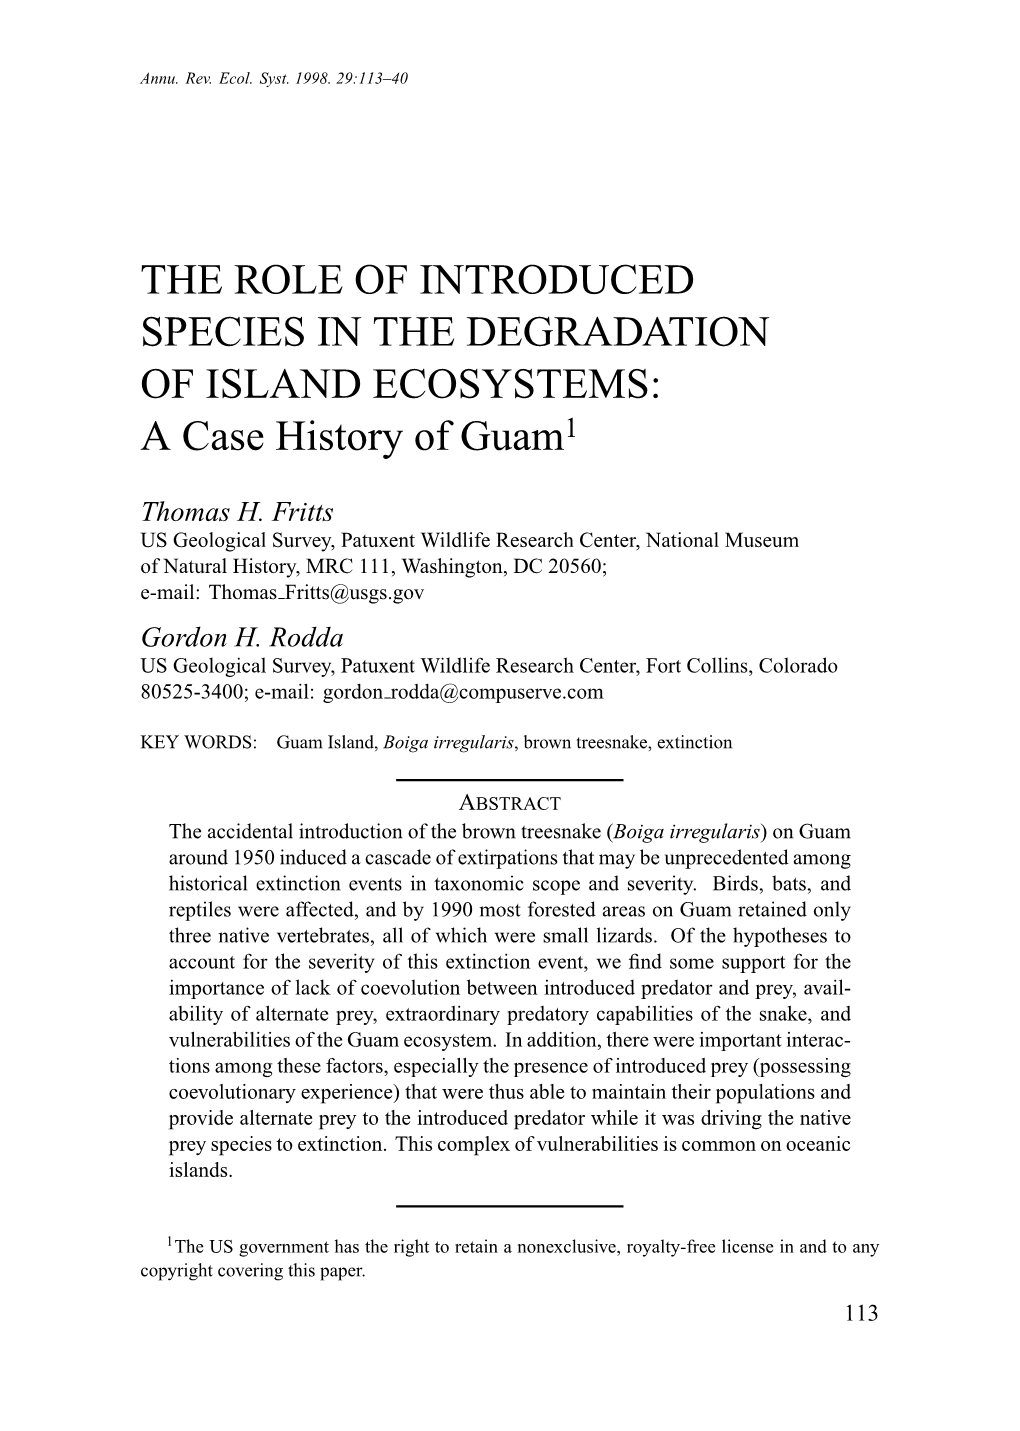 THE ROLE of INTRODUCED SPECIES in the DEGRADATION of ISLAND ECOSYSTEMS: a Case History of Guam1